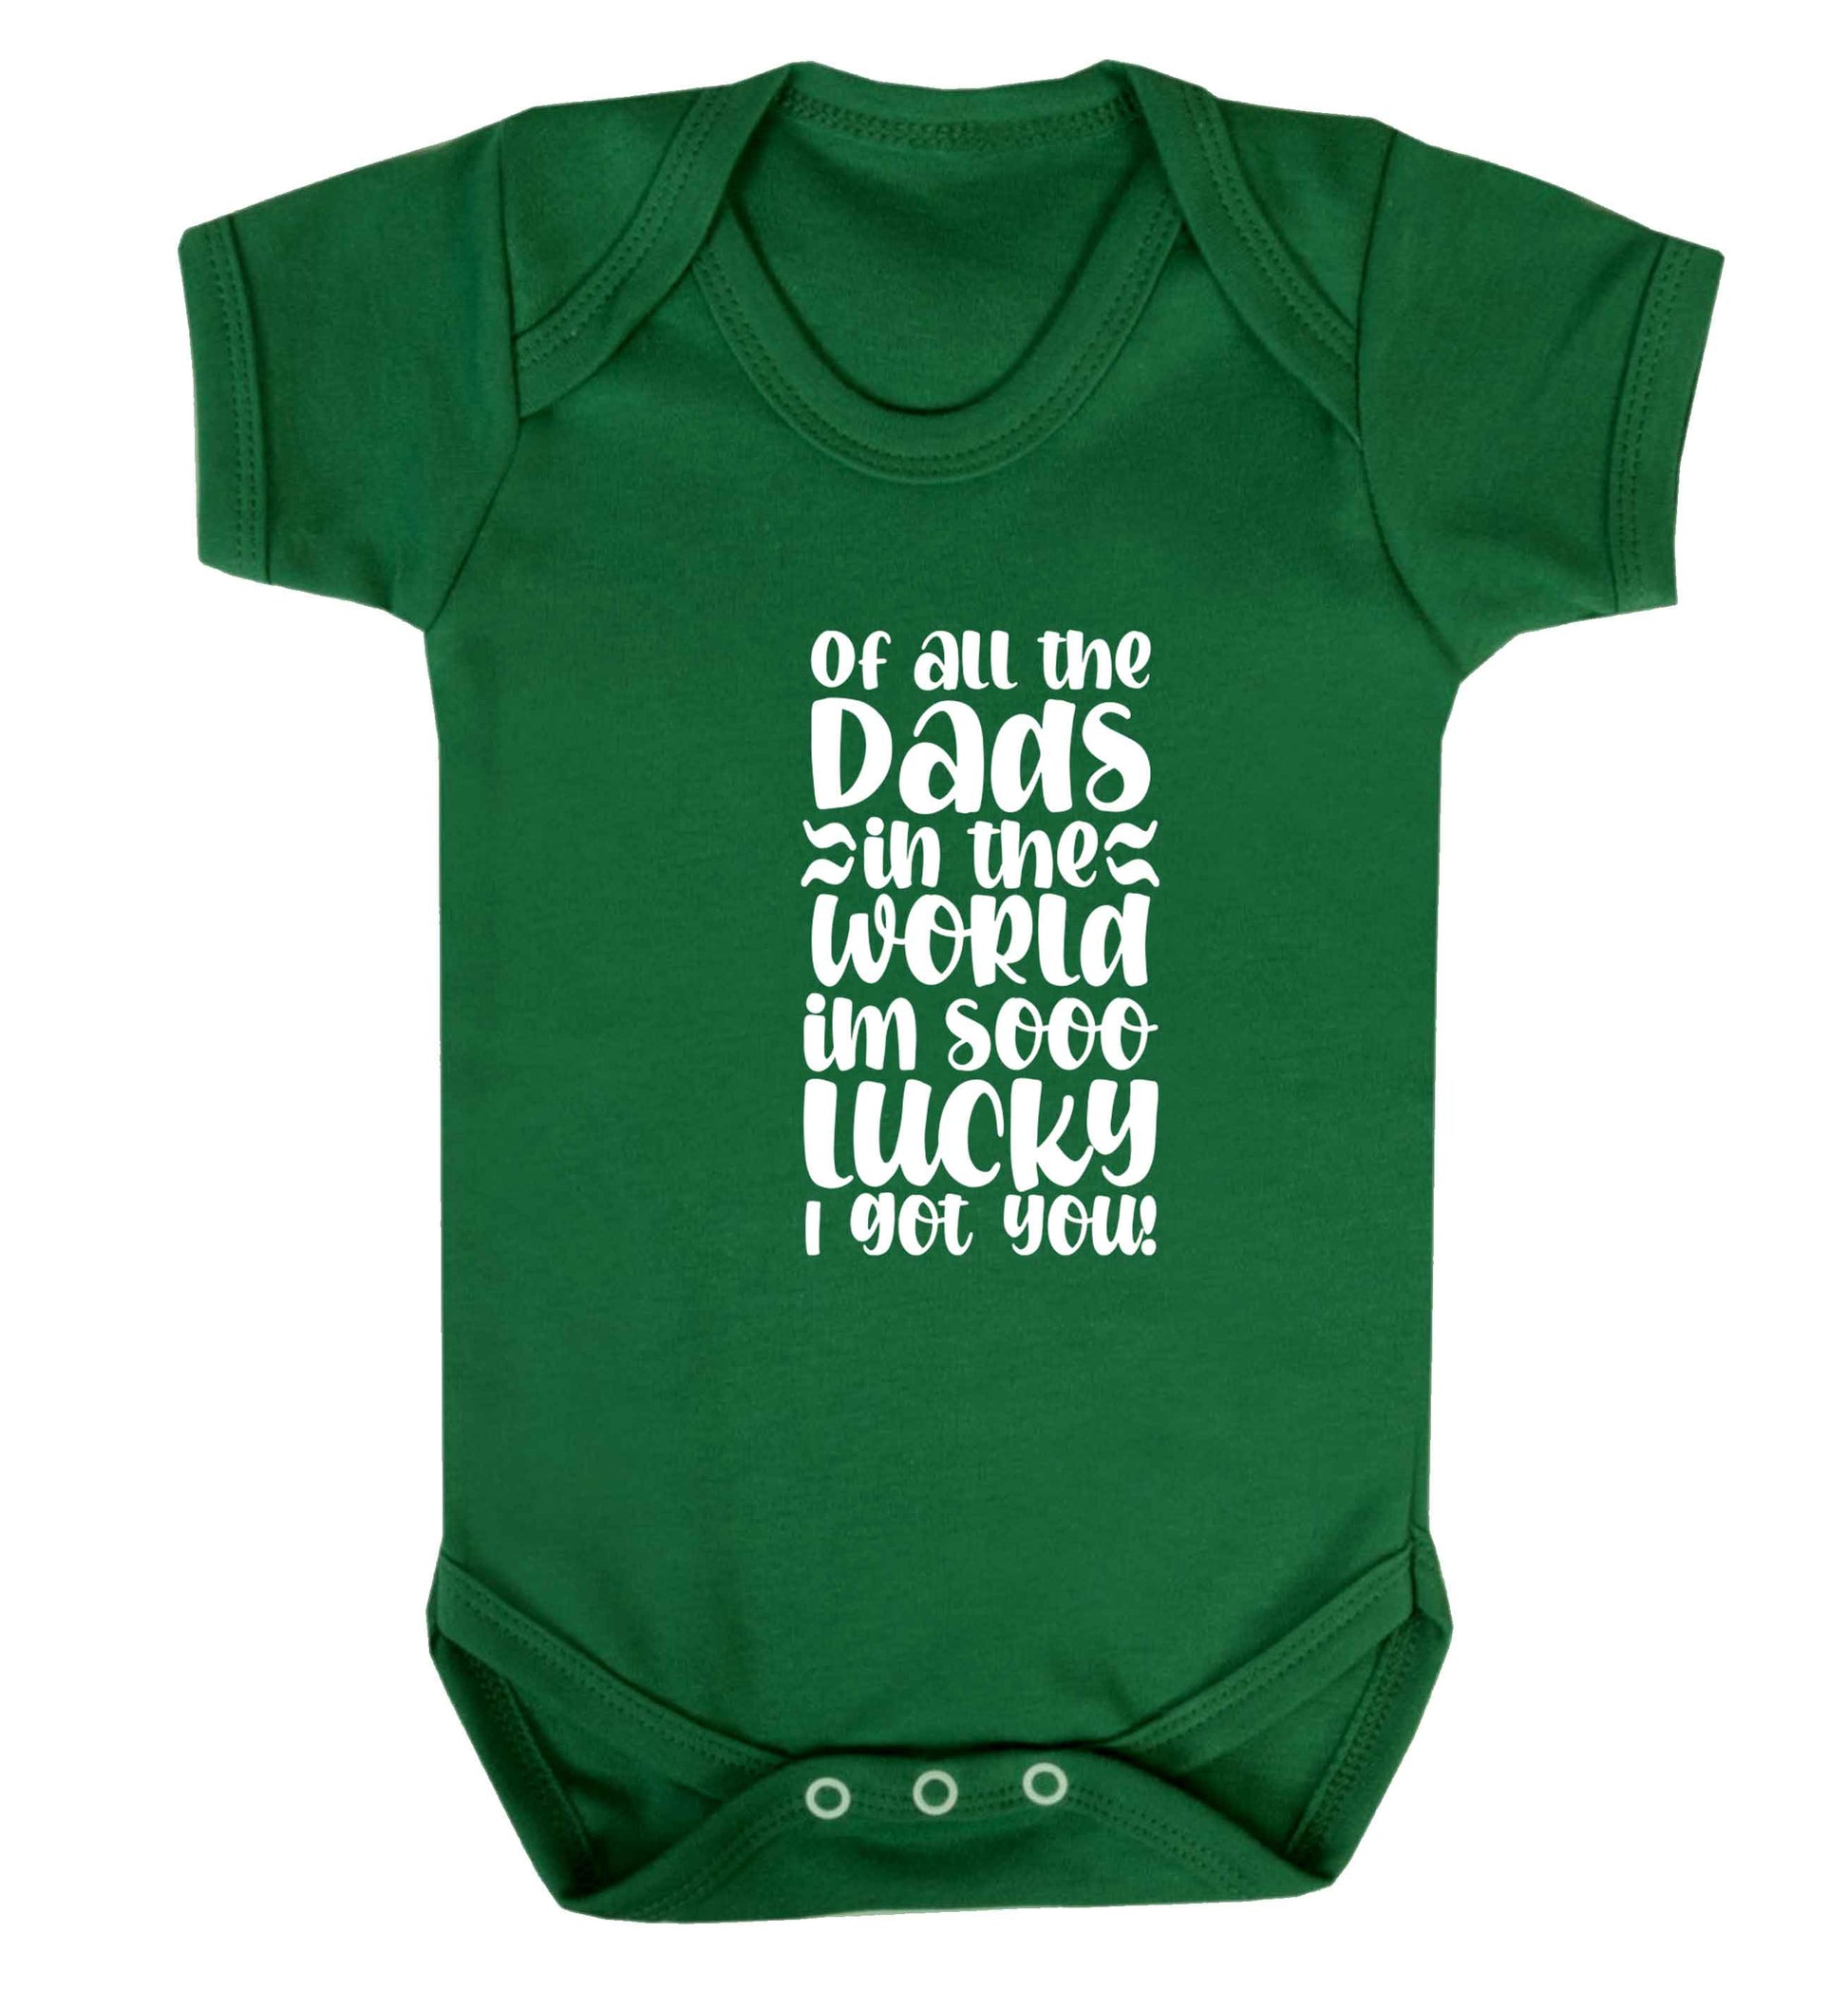 I'm as lucky as can be the worlds greatest dad belongs to me! baby vest green 18-24 months